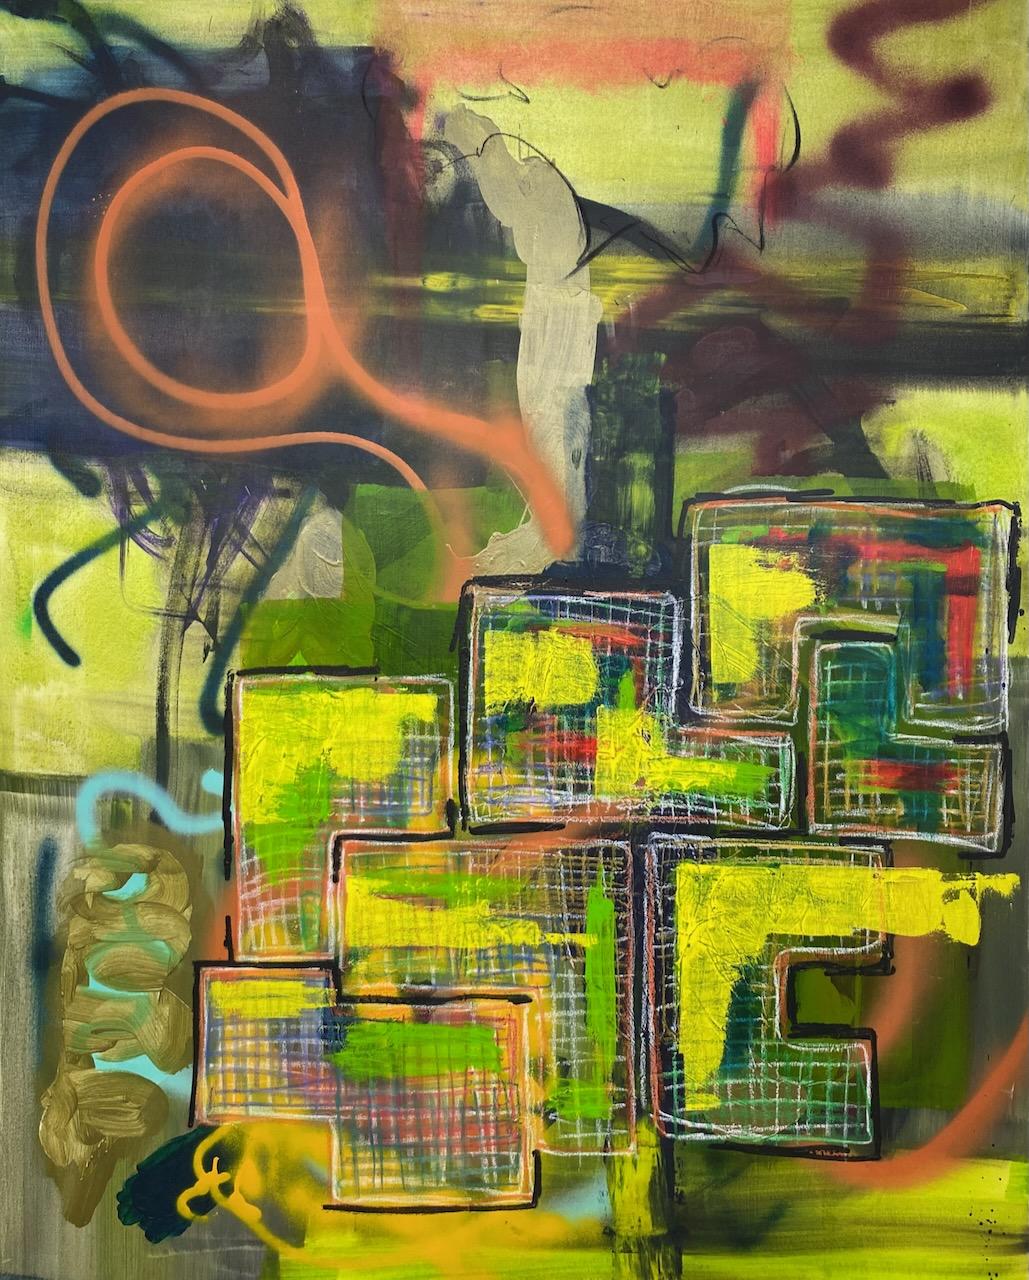 Pierre Morquin Abstract Painting - "Urbanity"abstract acrylic on canvas 162x130cm 2019